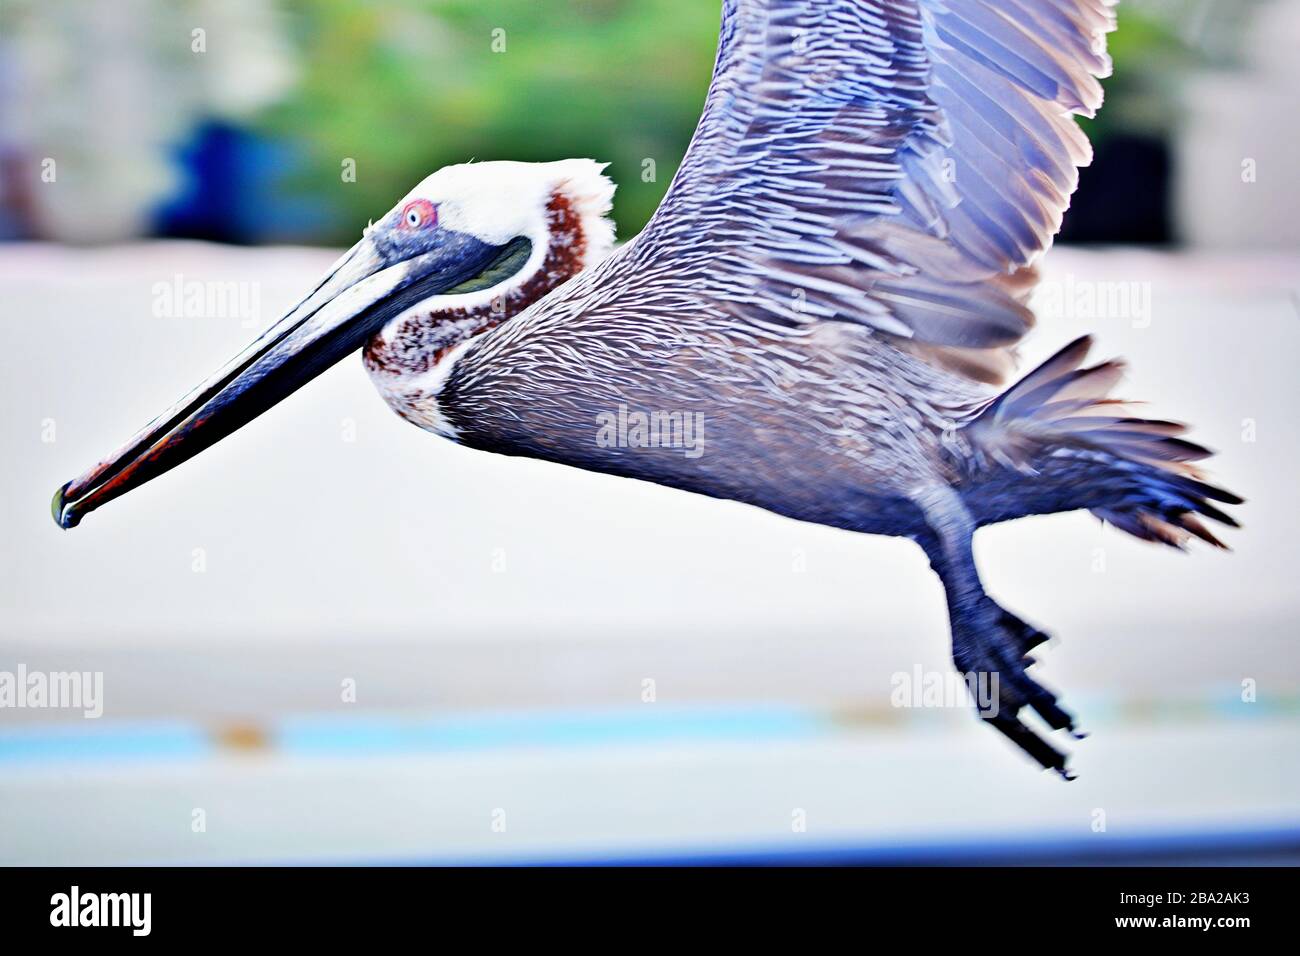 close up of flying pelican Stock Photo